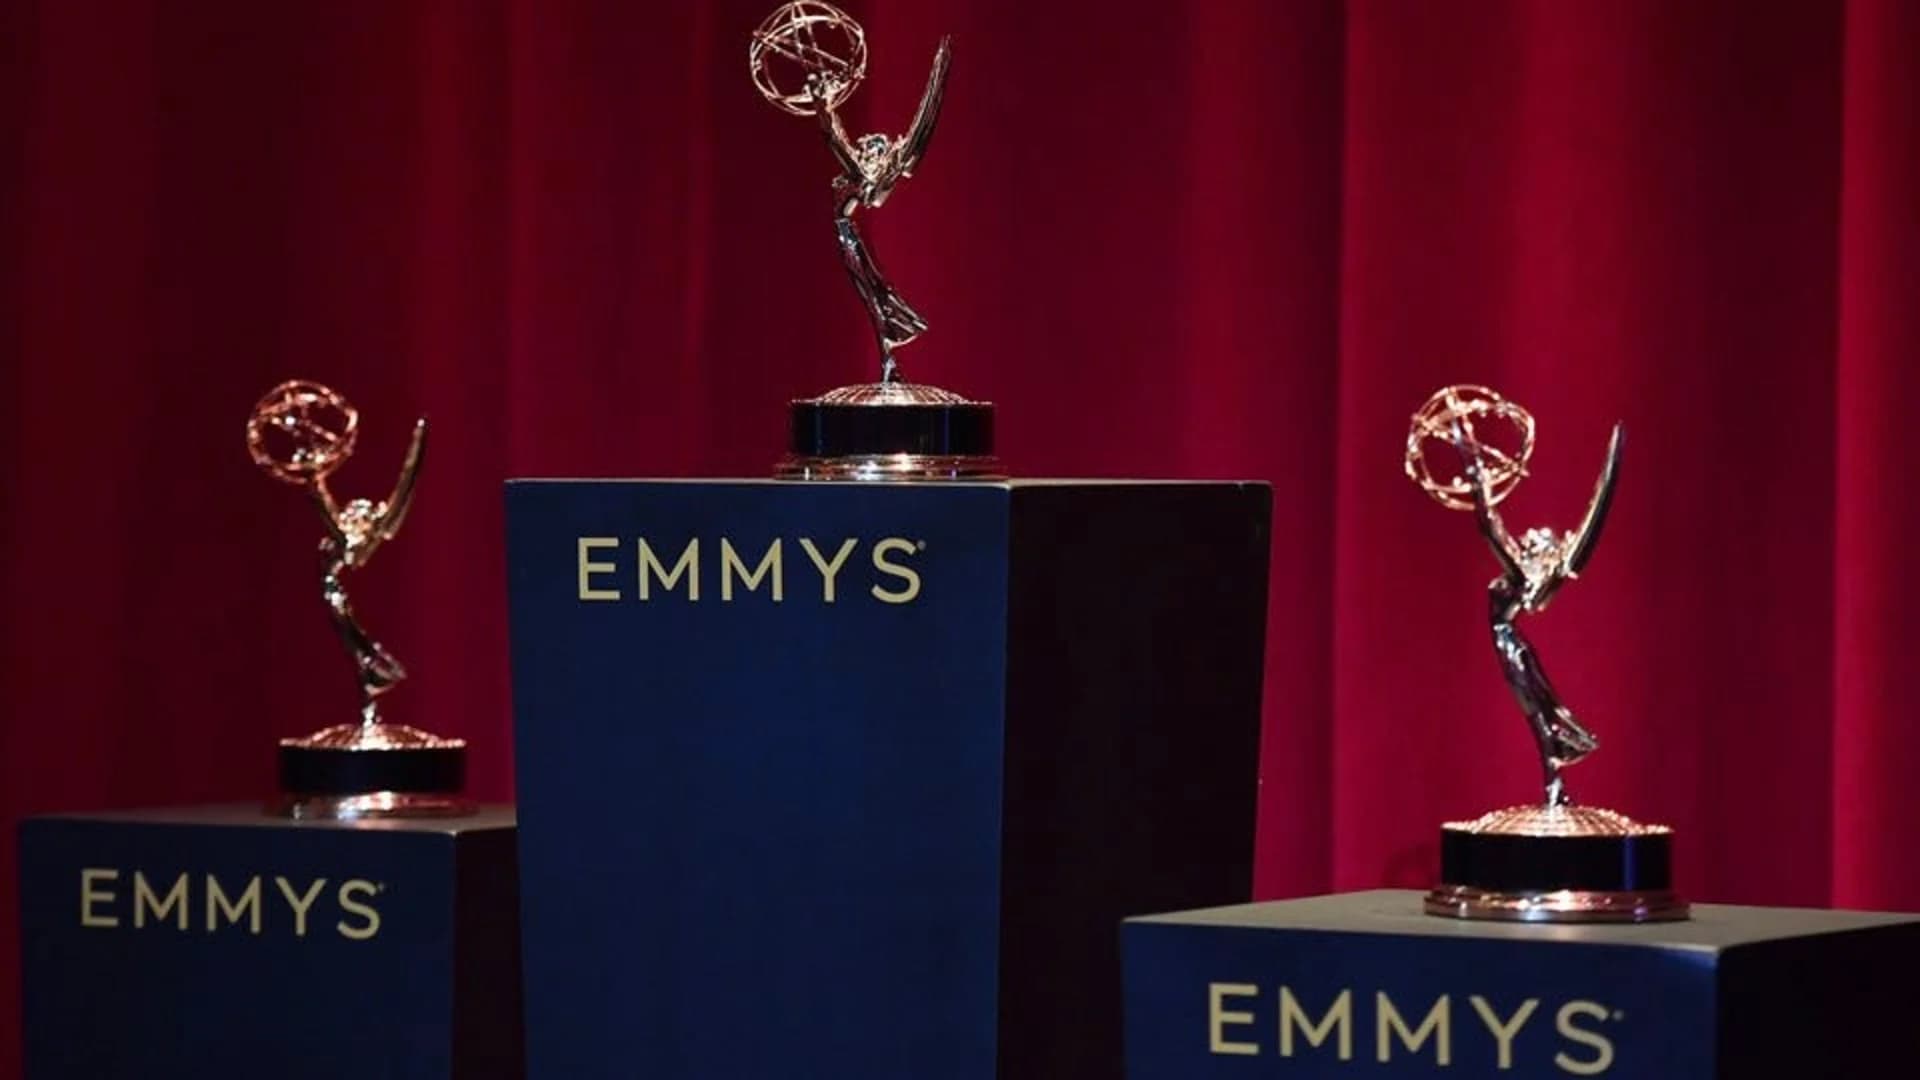 News 12 Networks earns 69 New York Emmy nominations